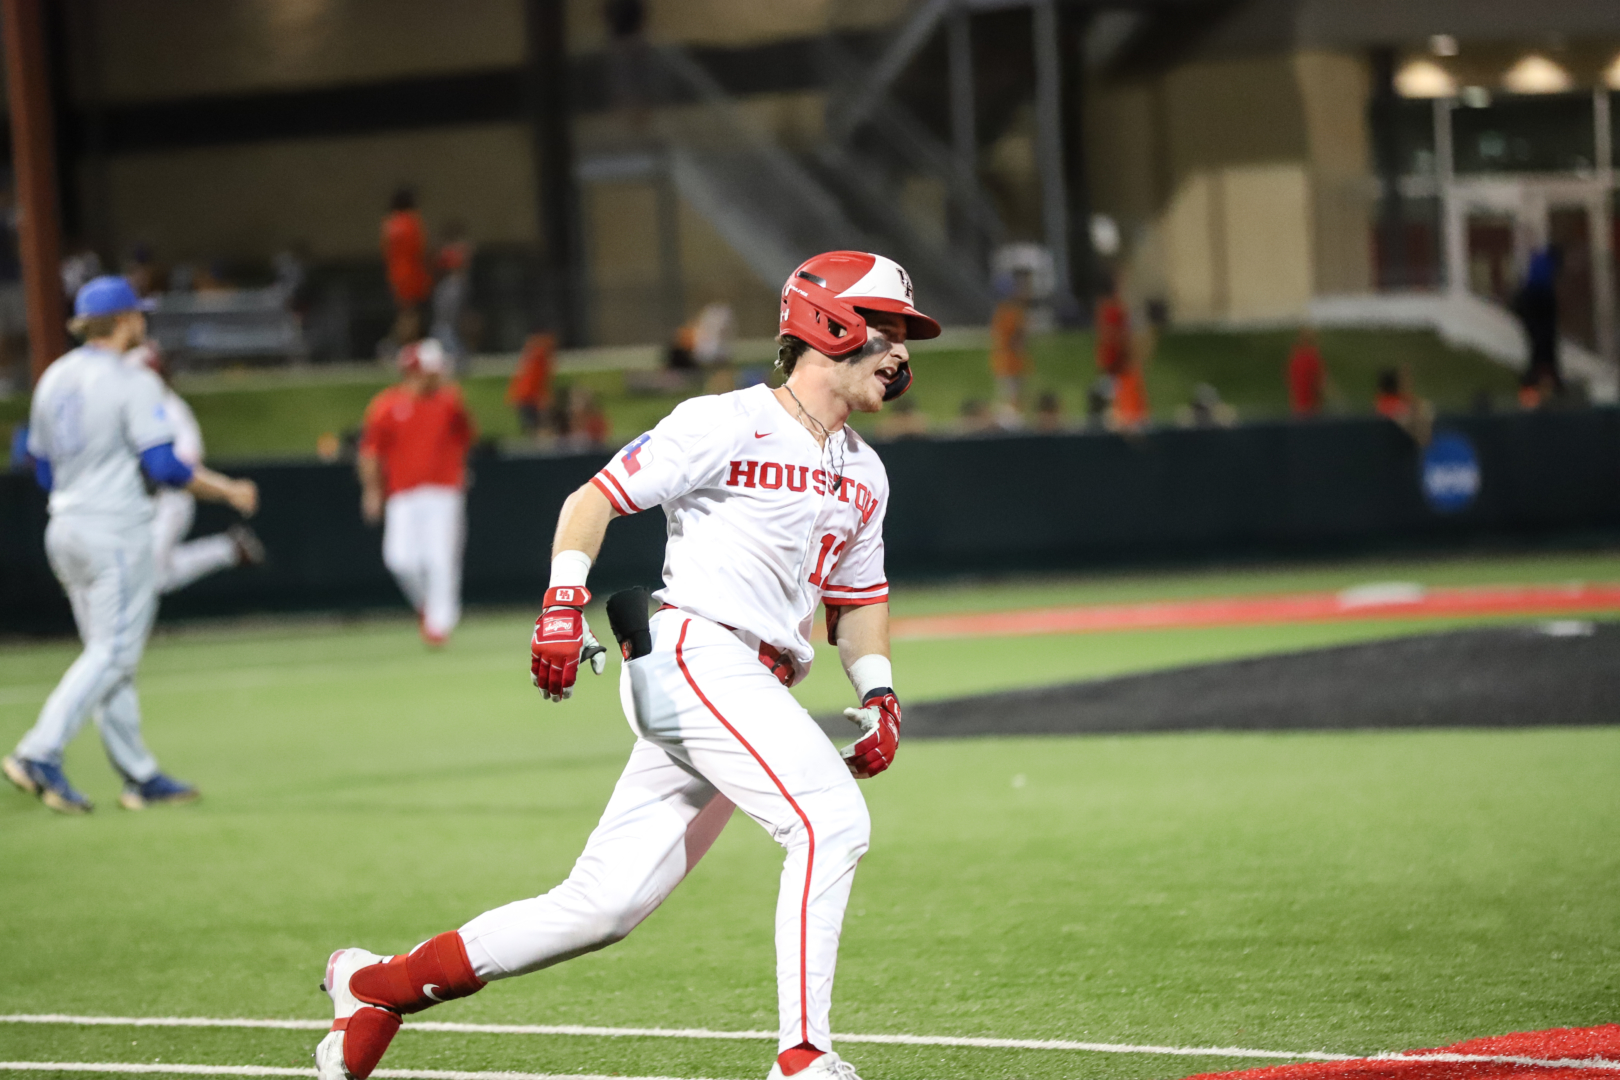 UH baseball short stop Ian McMillan hit two homers in the Cougars victory over USF on Sunday. | Sean Thomas/The Cougar